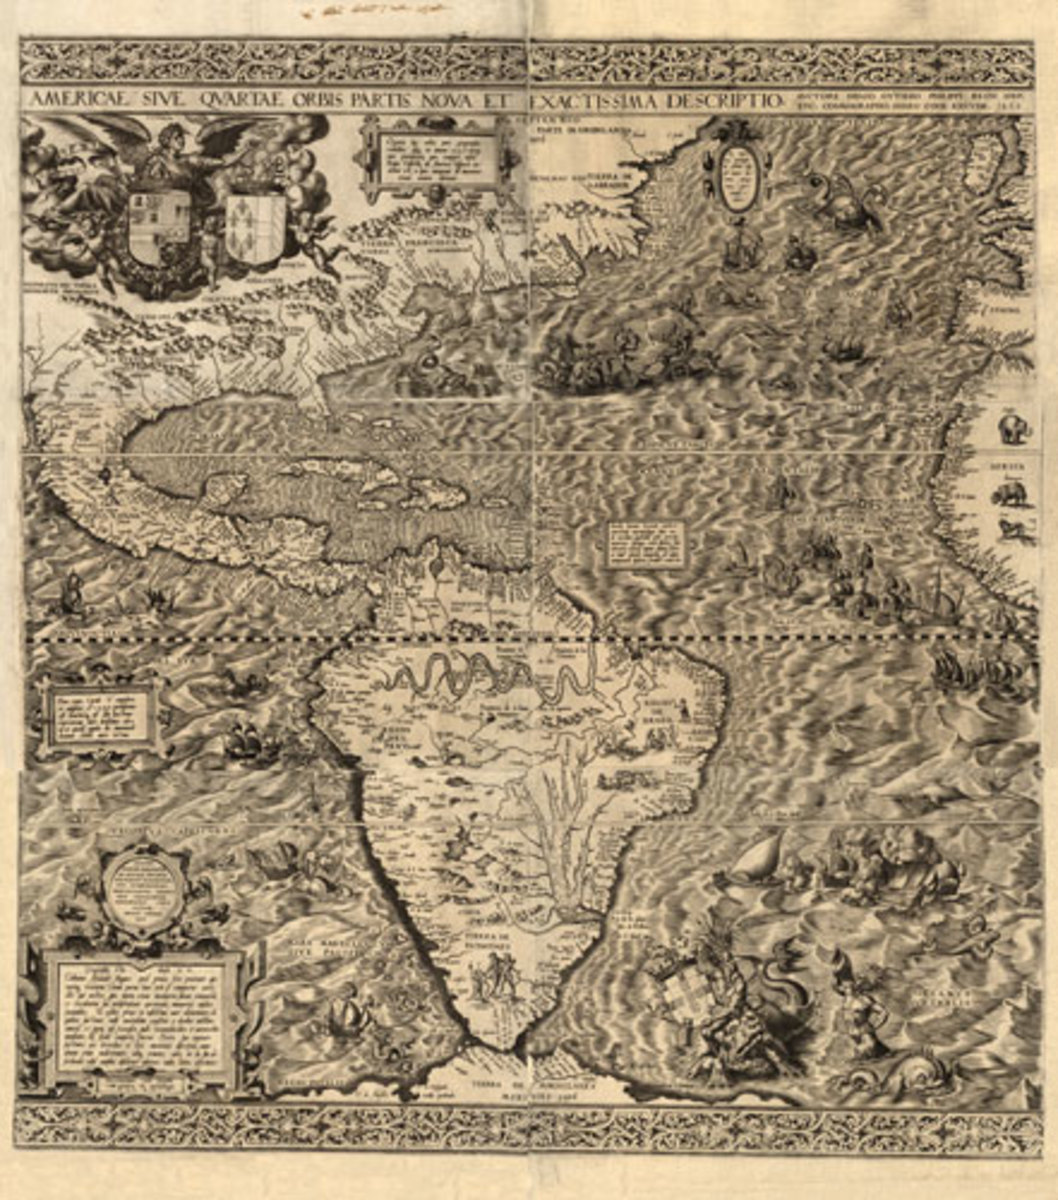 1562 MAP OF THE NEW WORLD